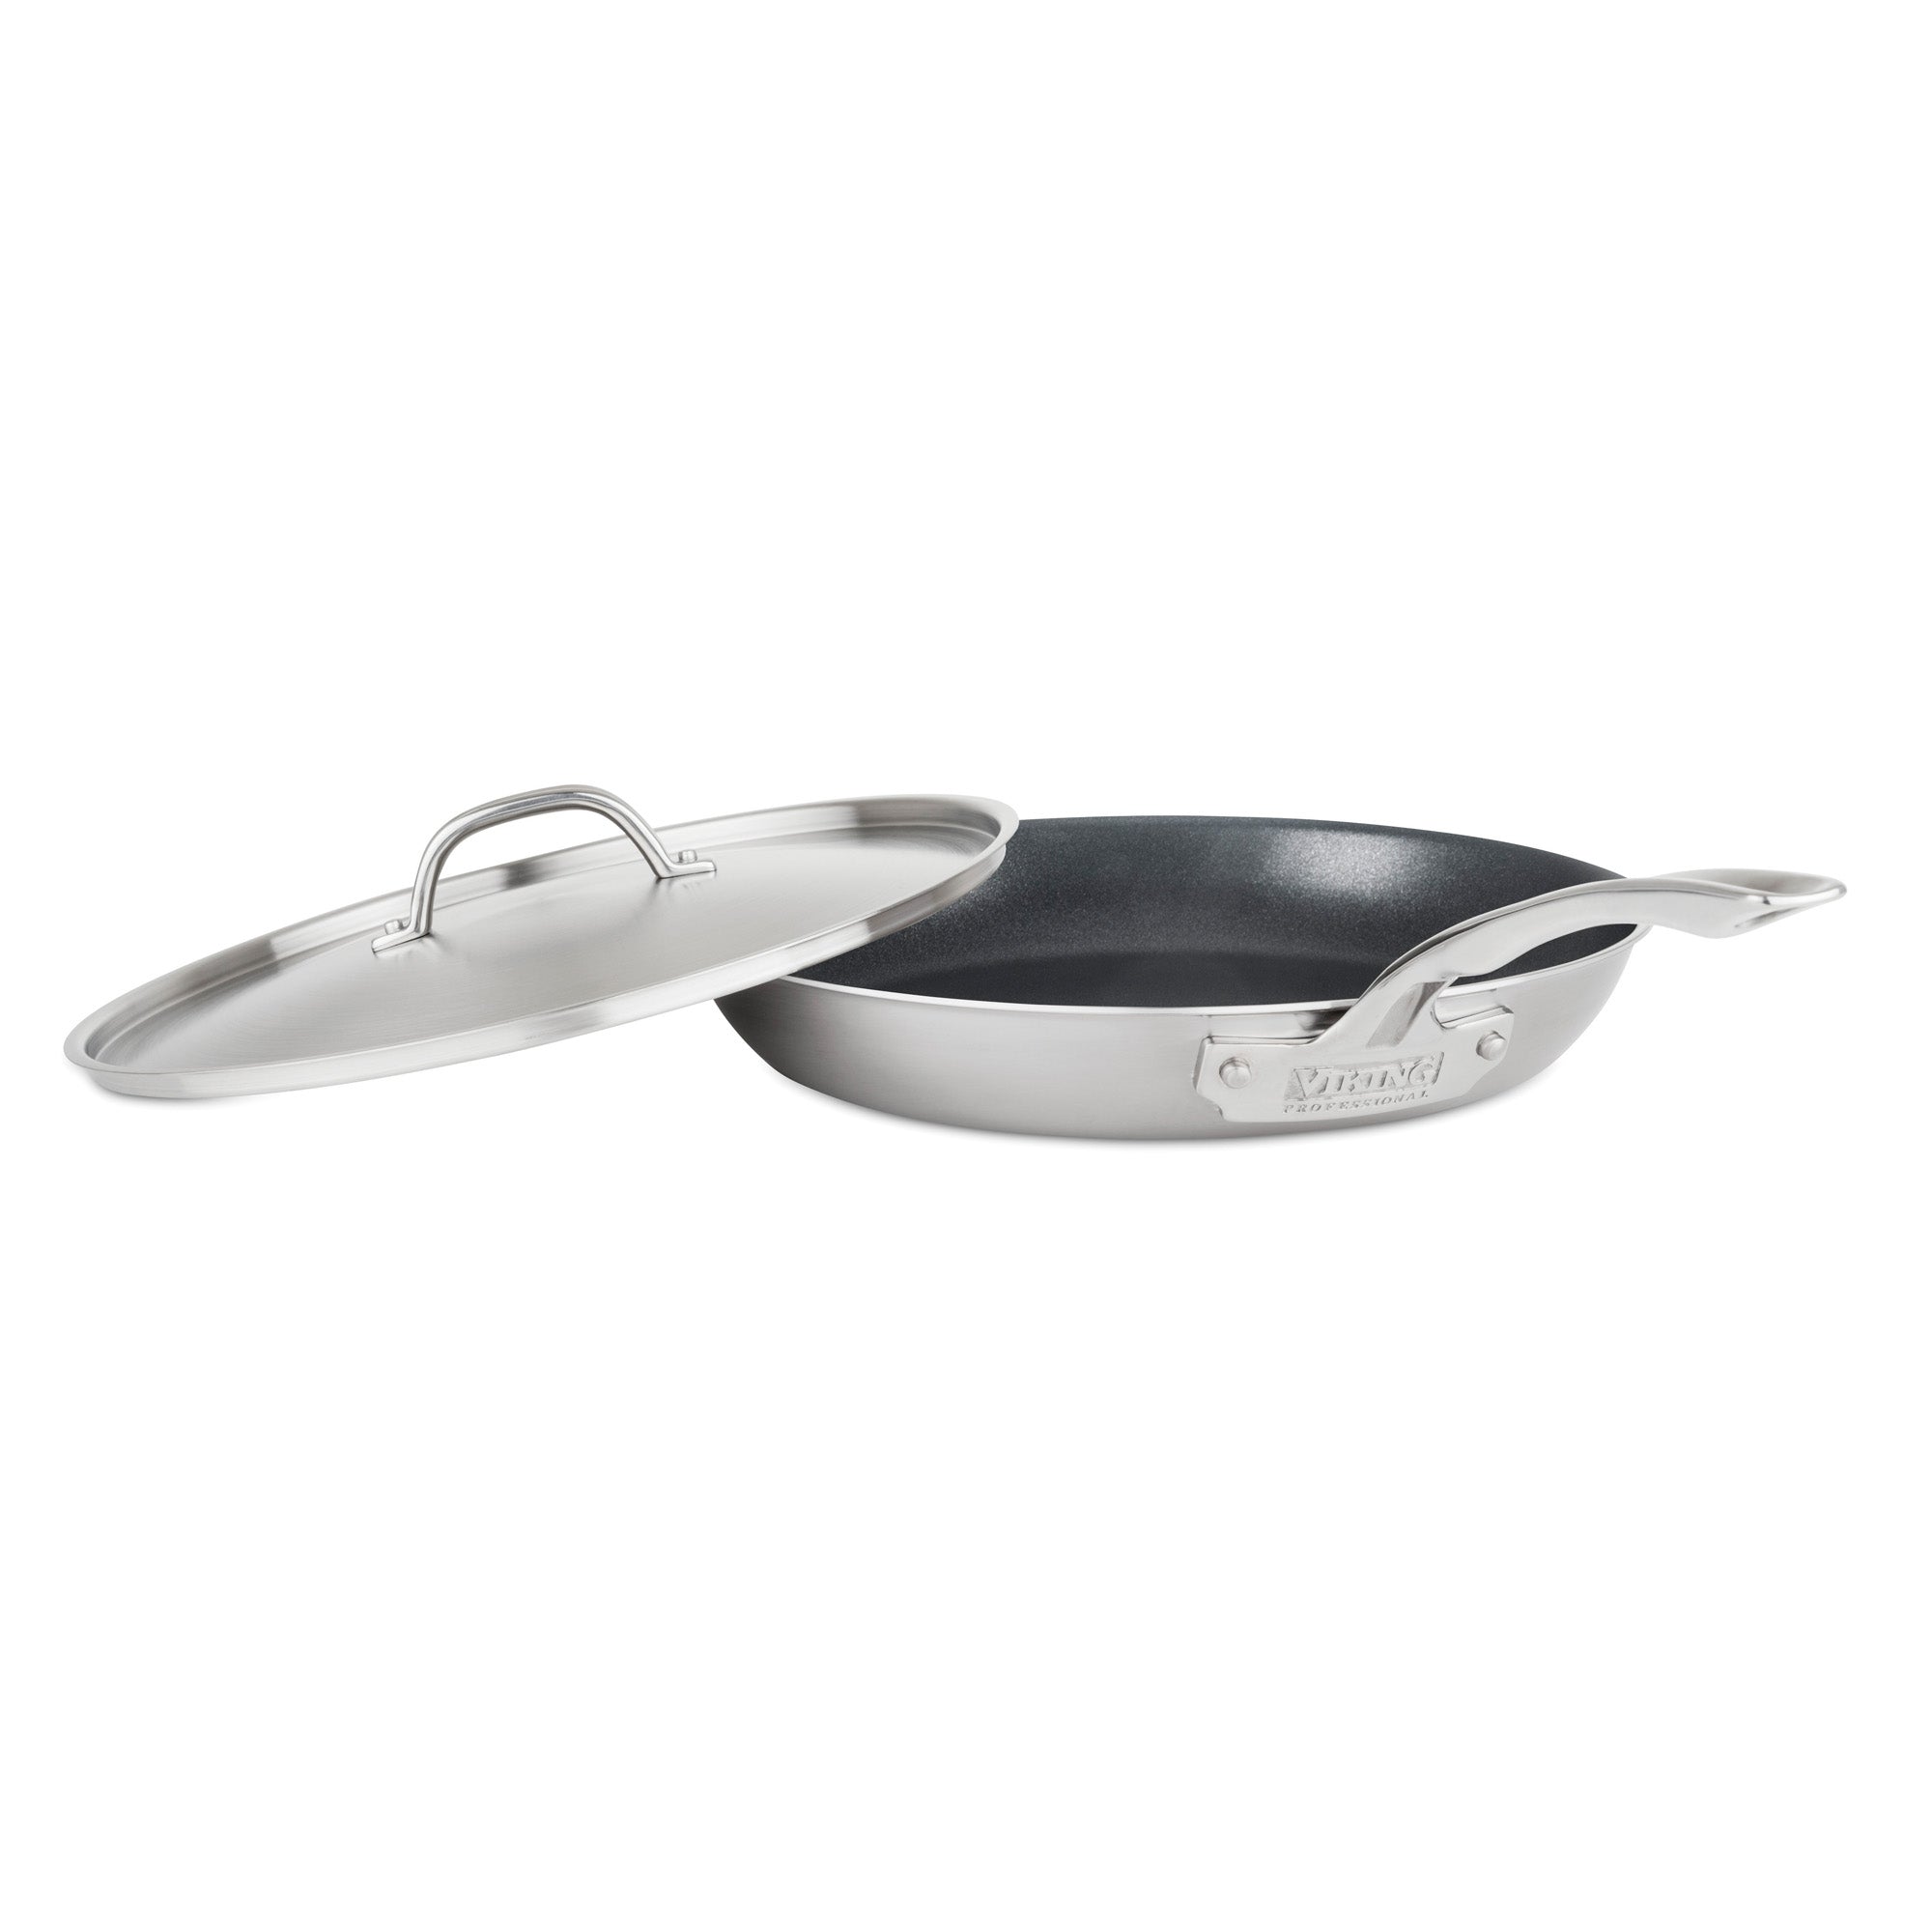 Steel Induction Frying Pan, 12 inch, Brushed Stainless Steel